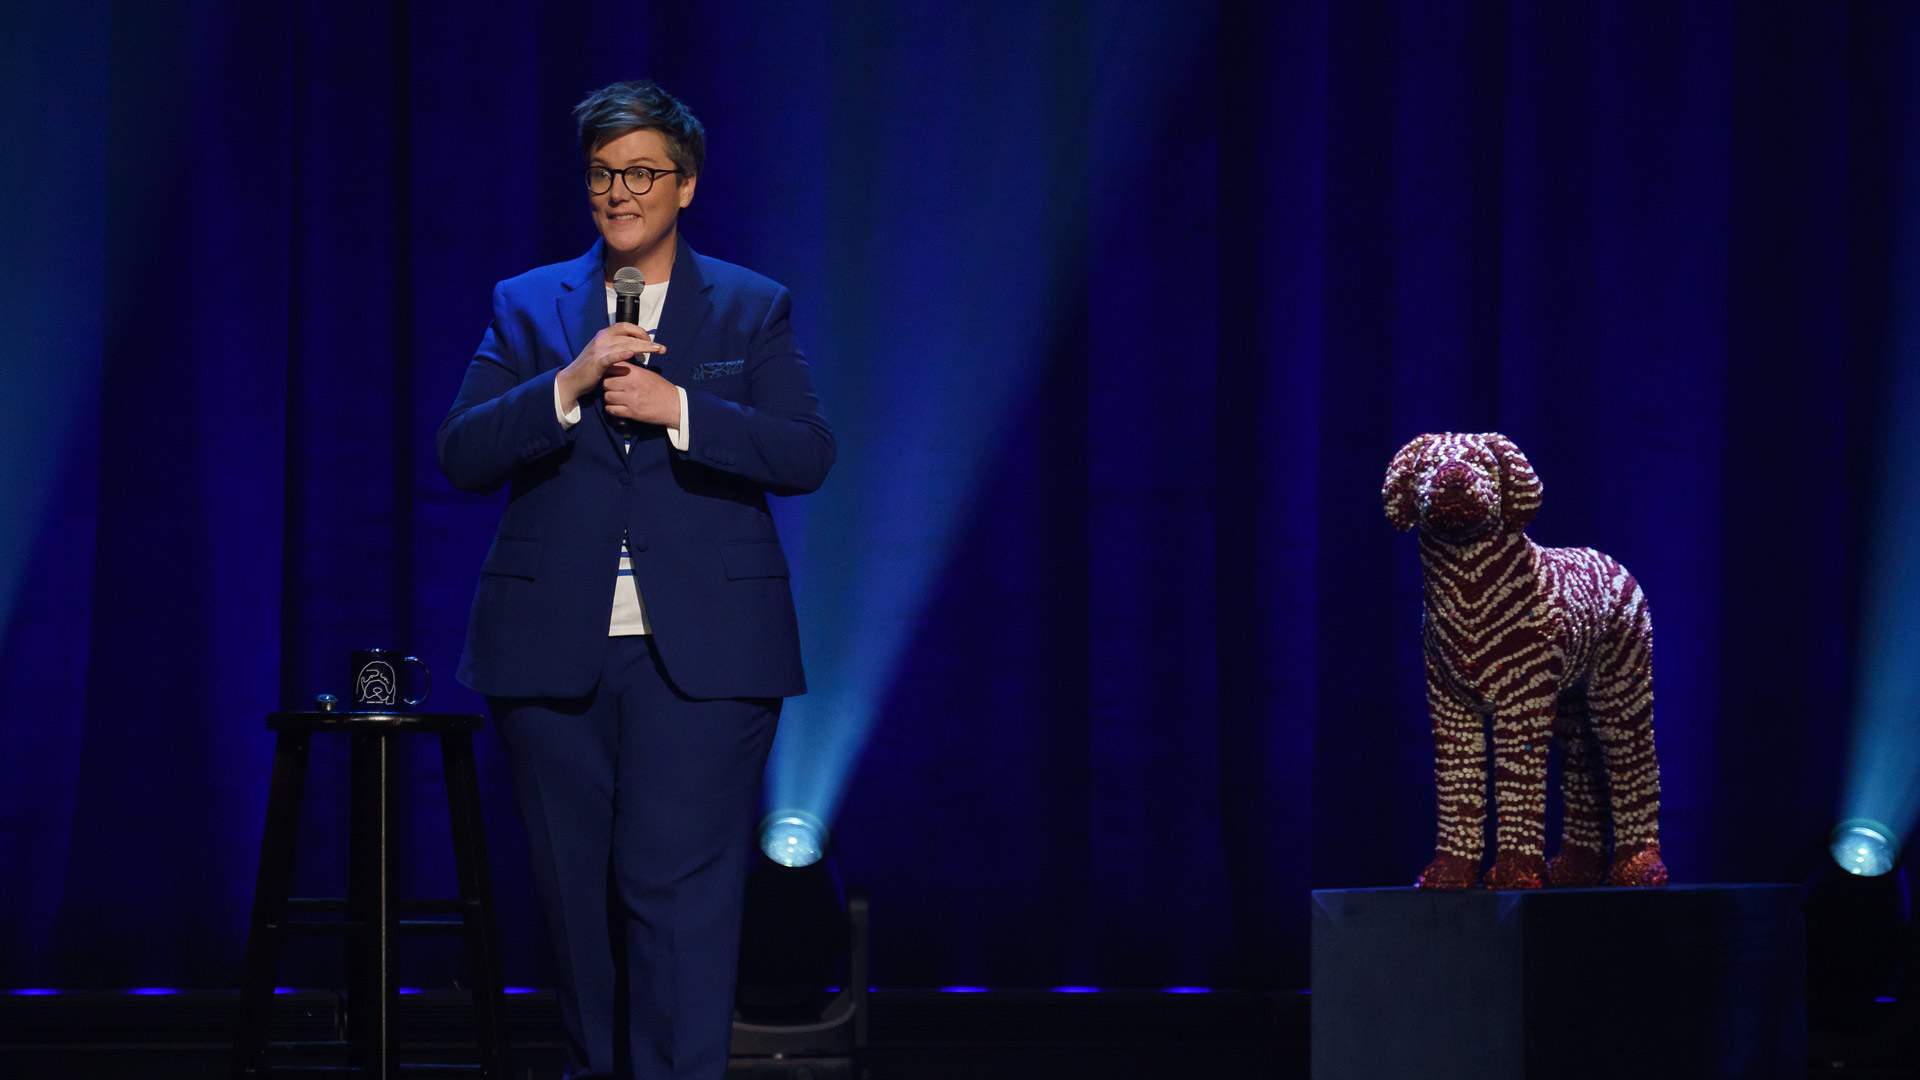 The Trailer for Hannah Gadsby's New Stand-Up Show 'Douglas' Is Here